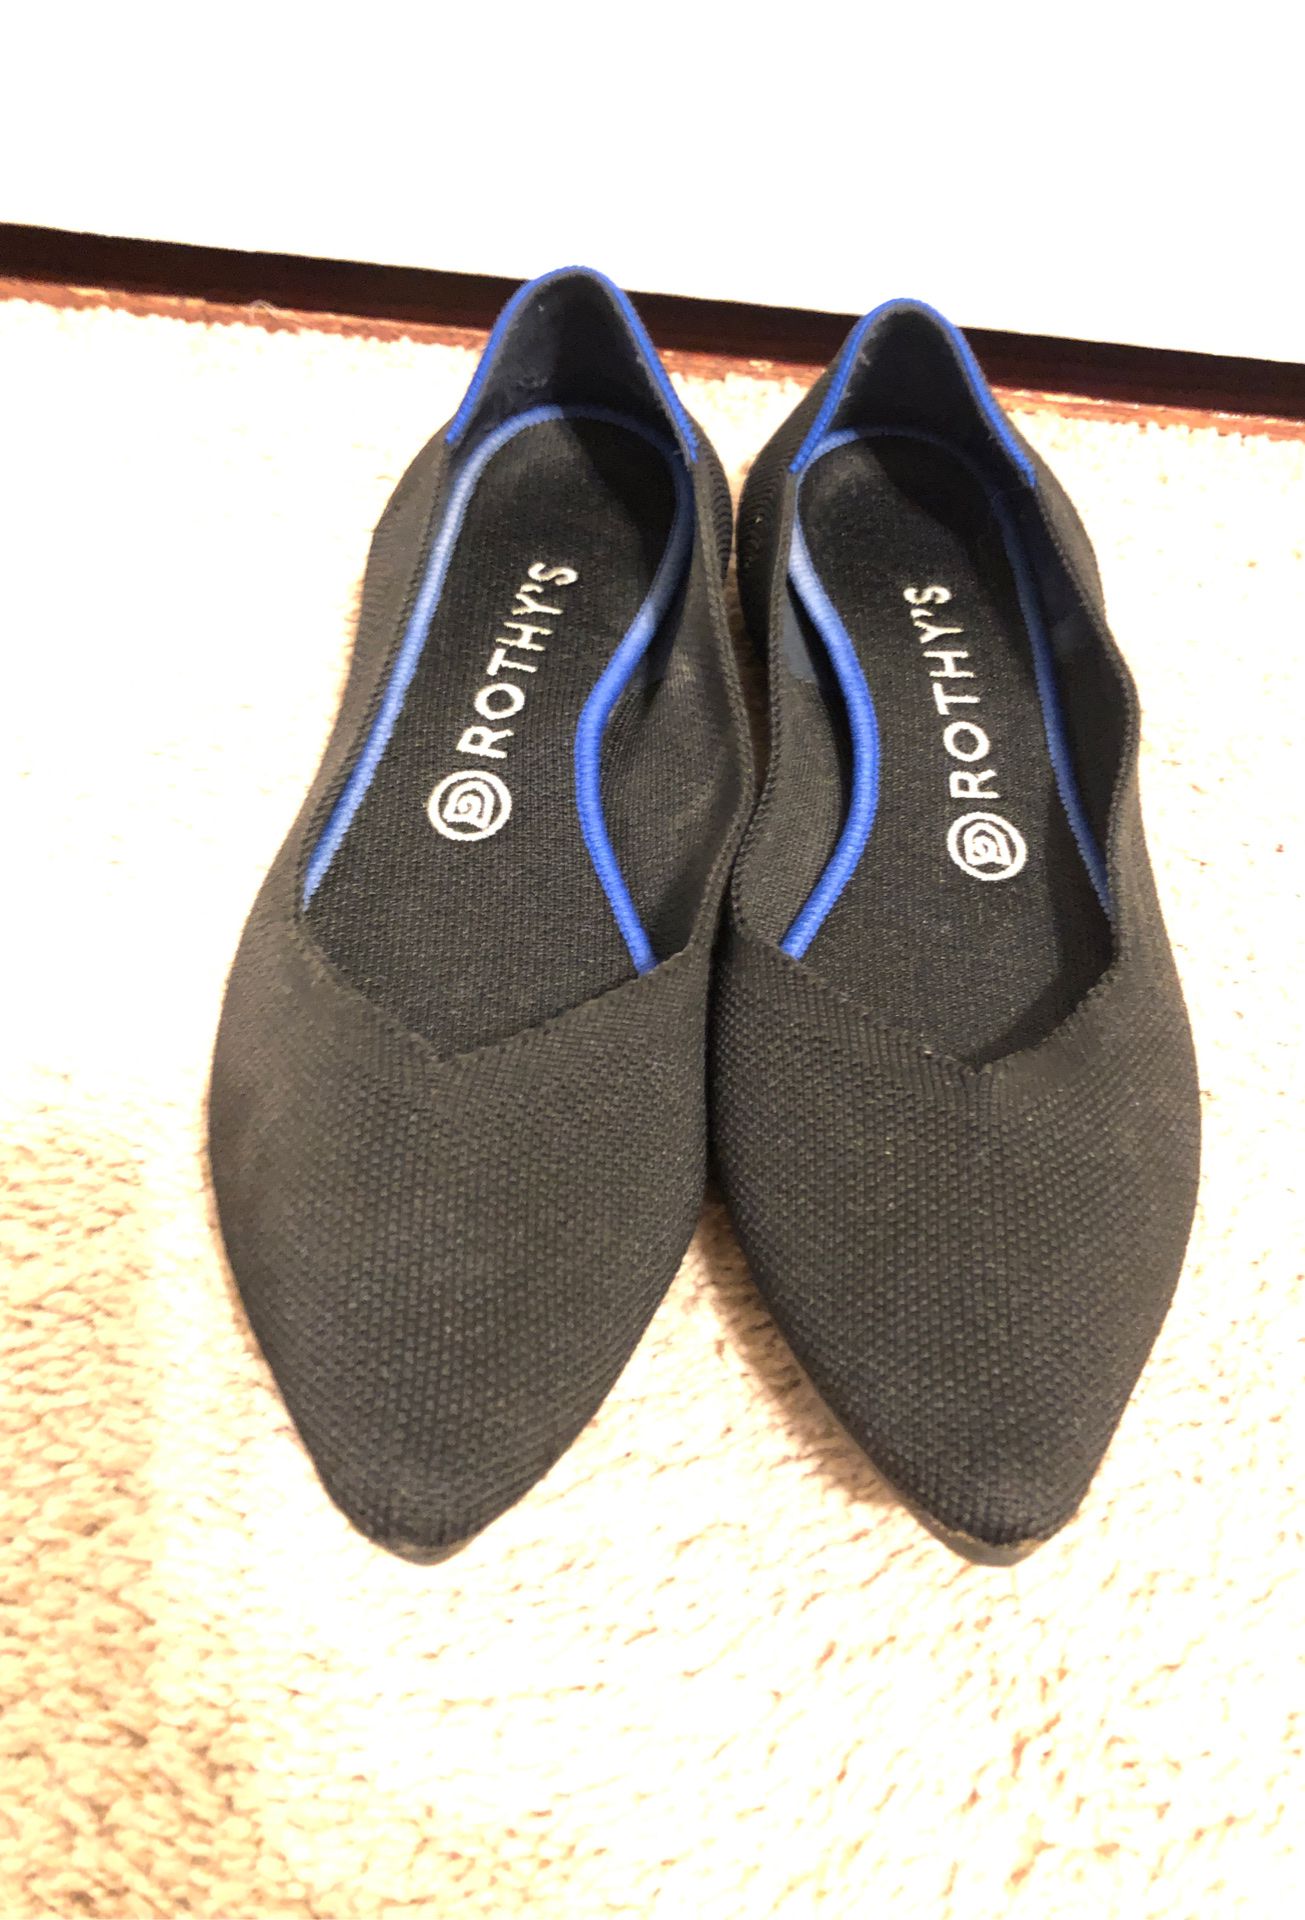 Rothy’s pointed toe Black Flats Size 9 1/2